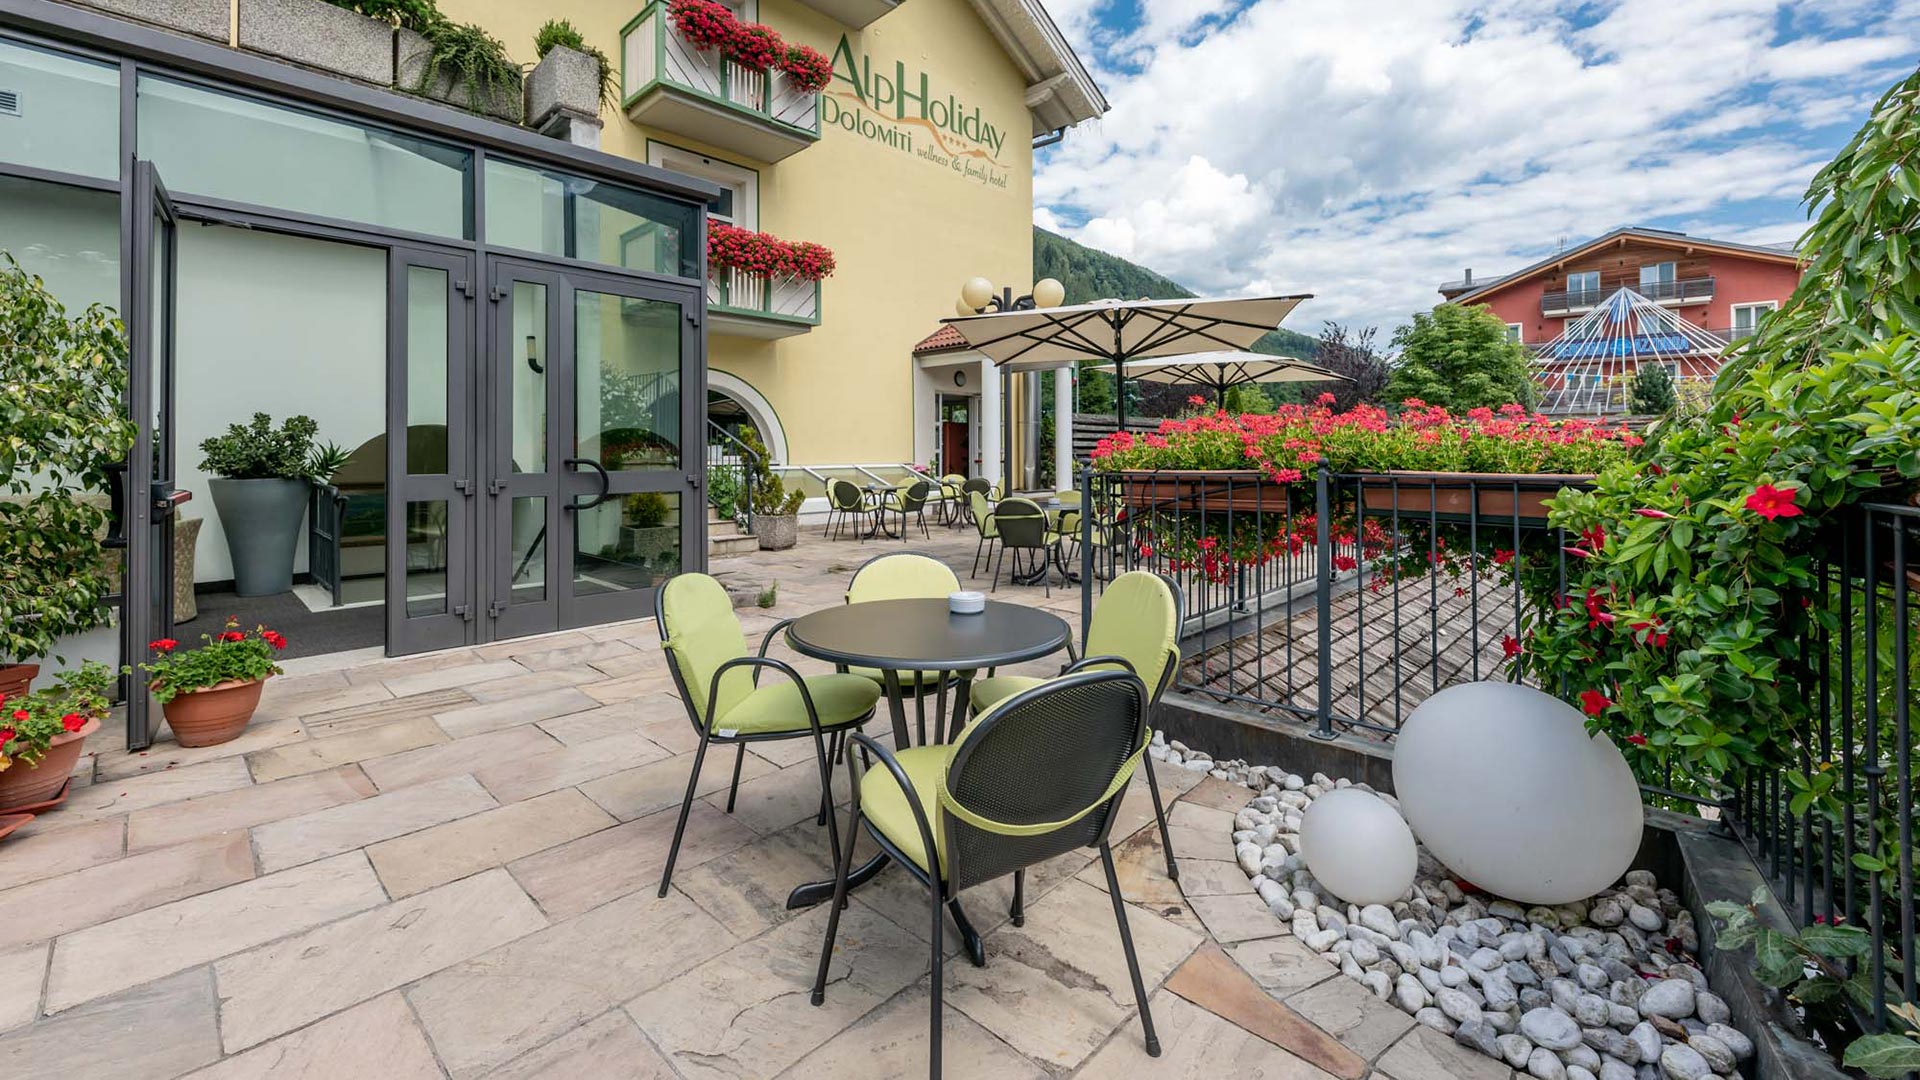 The Family AlpHoliday Hotel offers breathtaking views and exciting activities in the enchanting Val di Sole to regenerate and enjoy.